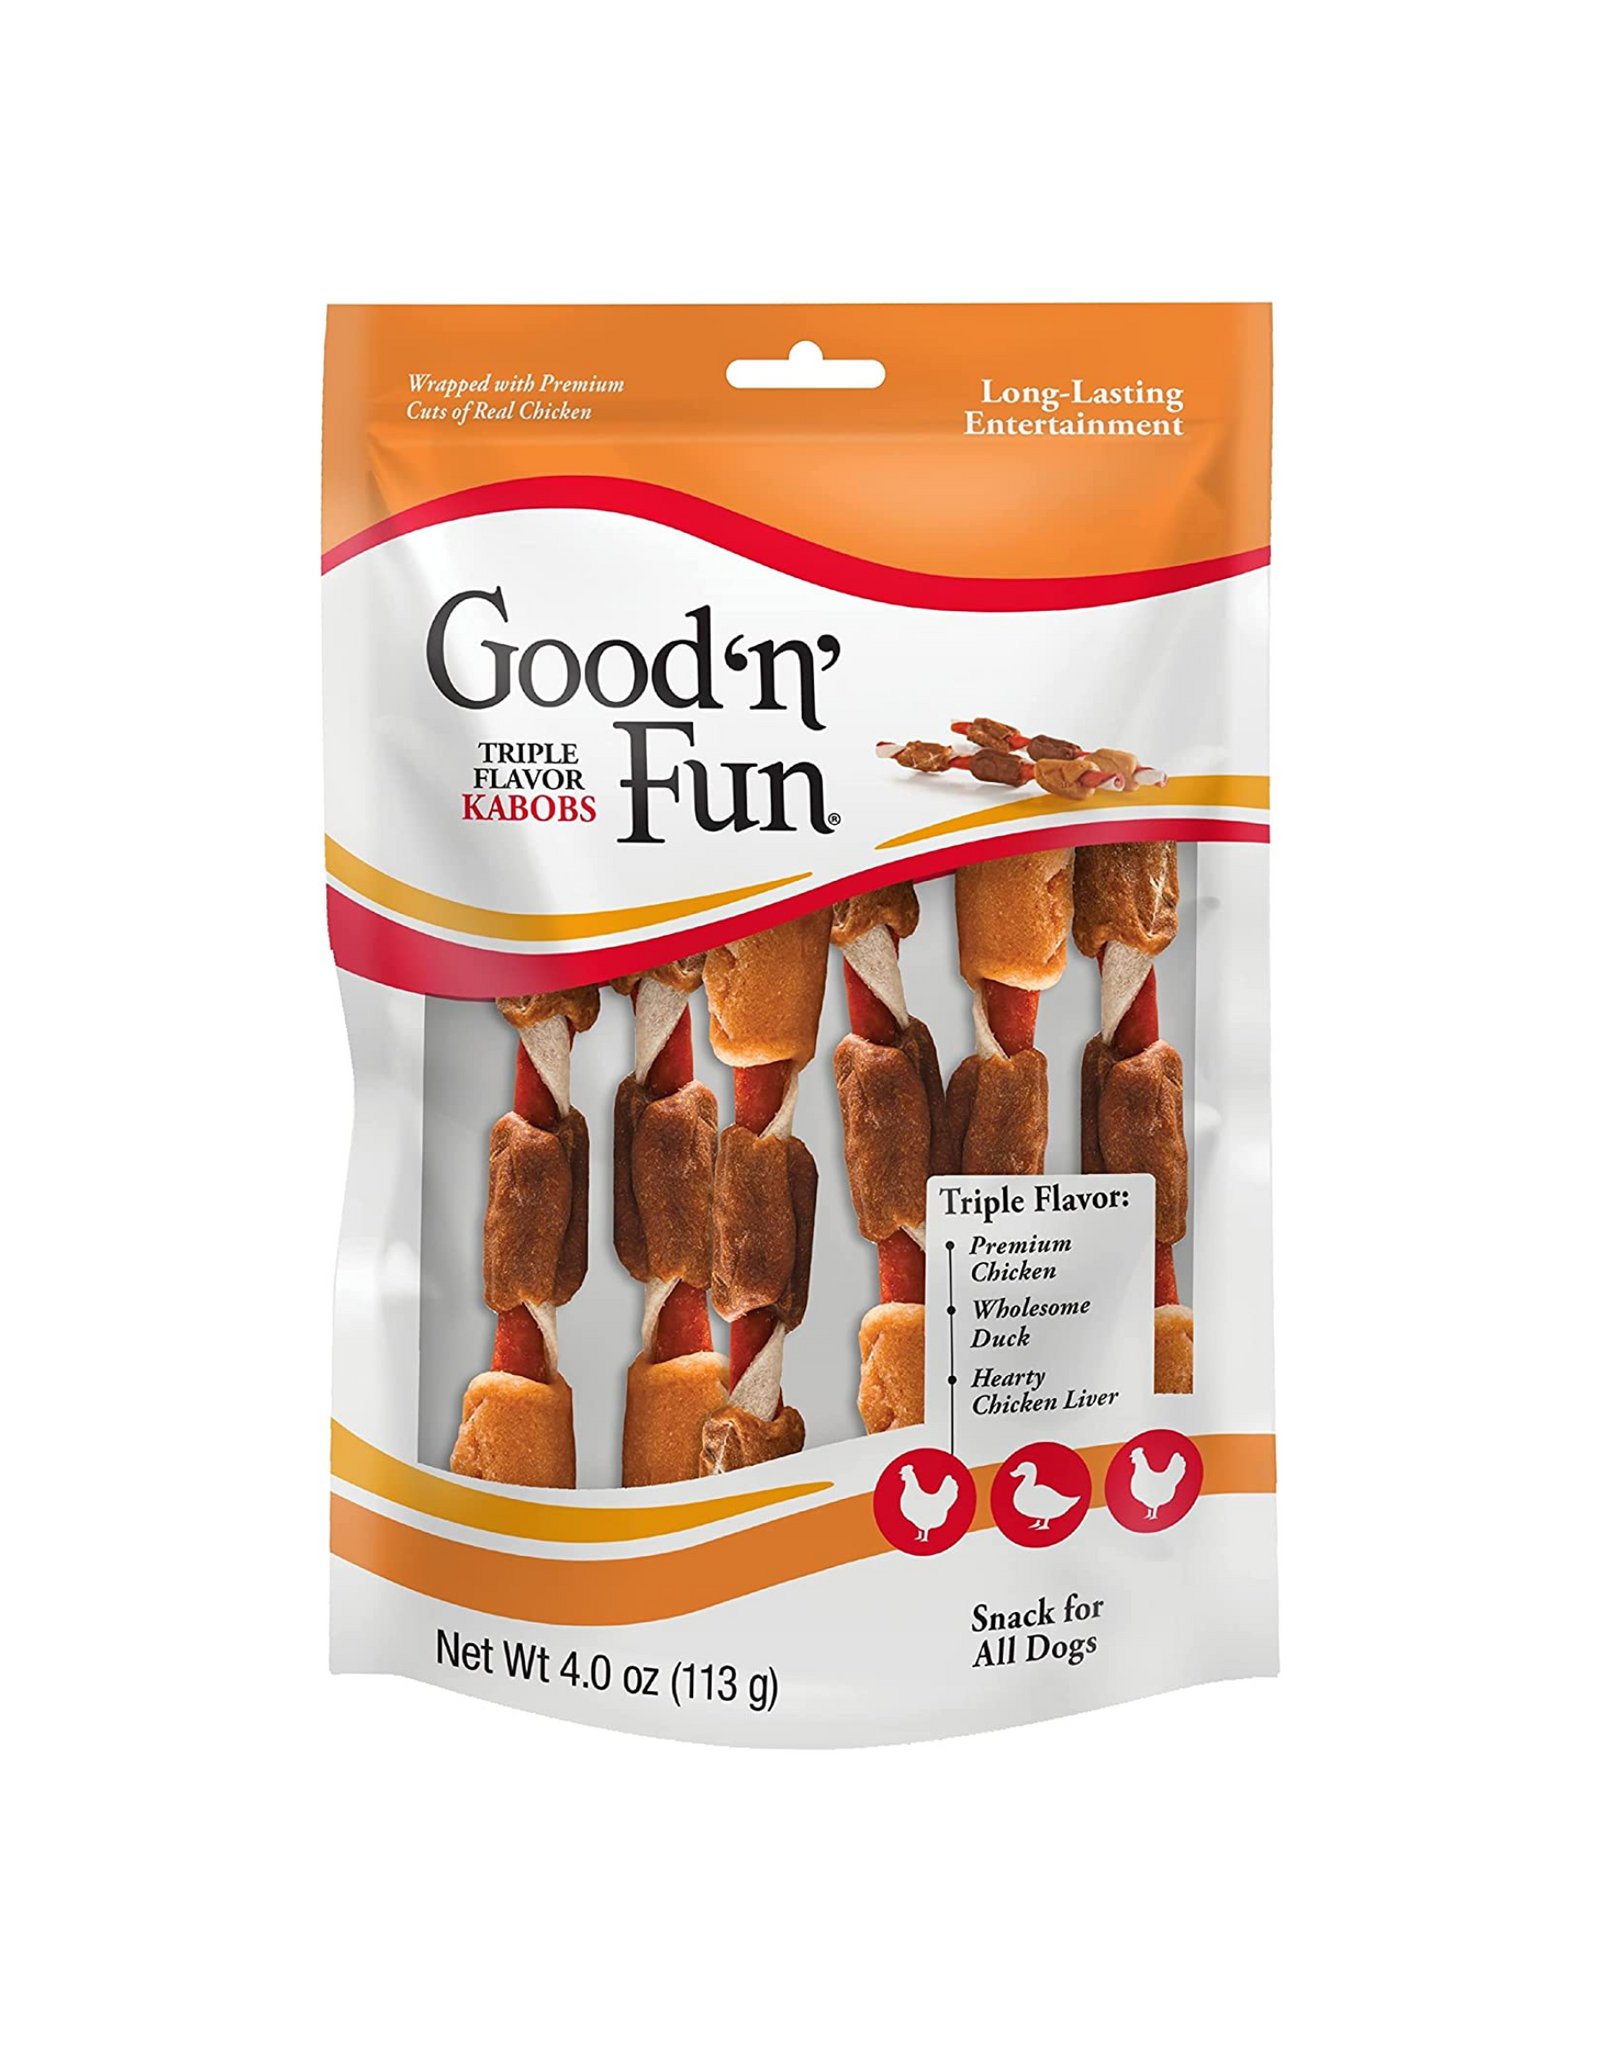 Good'N'Fun Triple Flavored Rawhide Kabobs for Dogs, 4 oz, 6 Ct (Pack of 1)